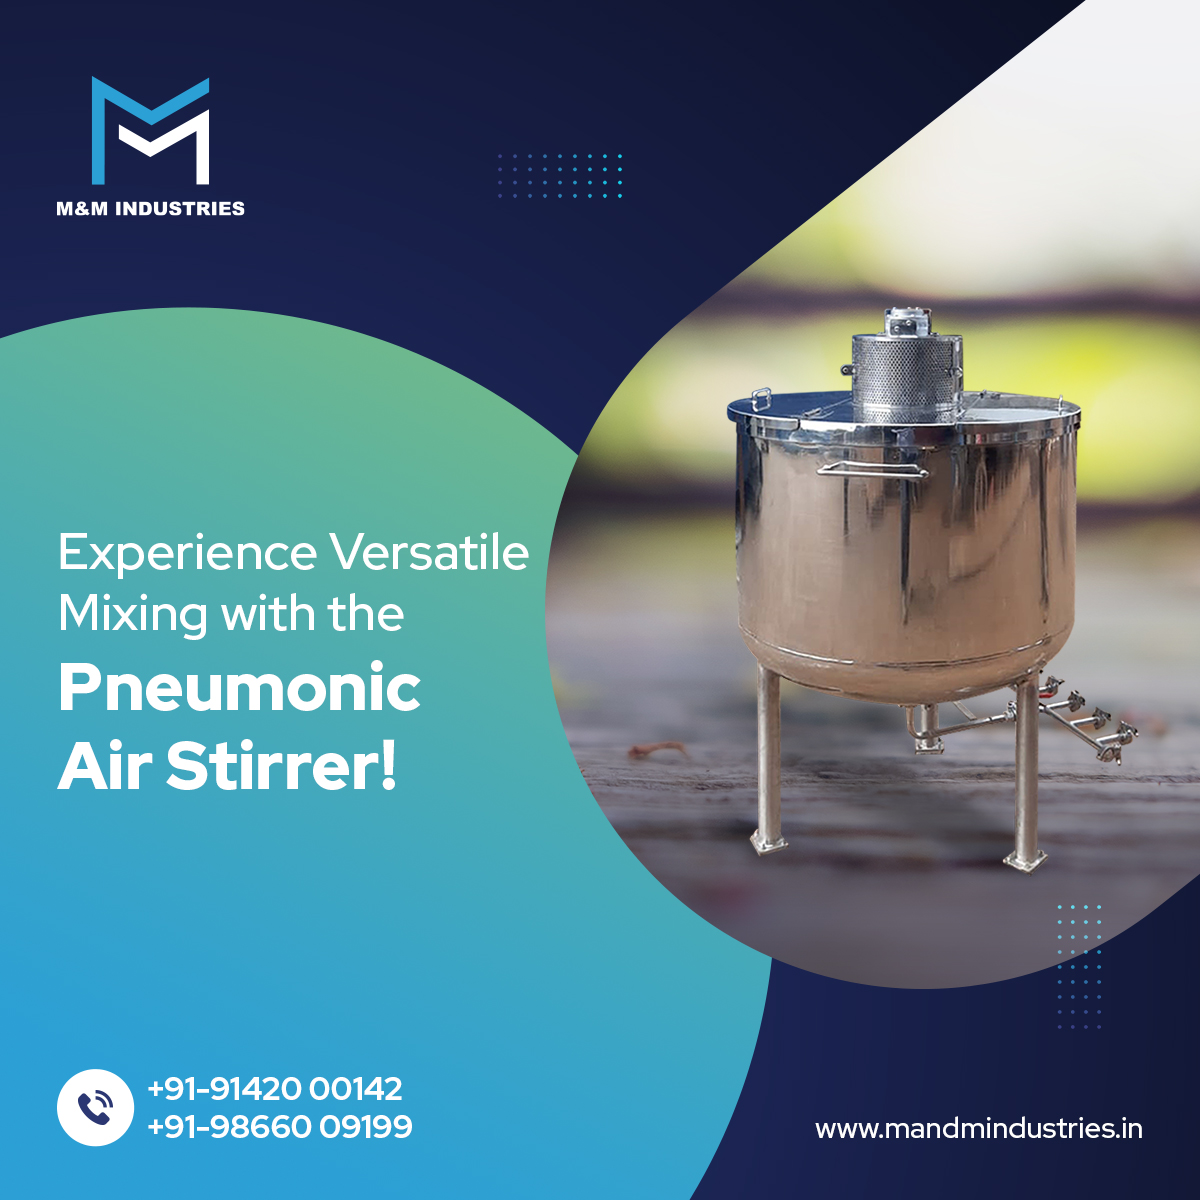 From liquids to powders, the Pneumonic Air Stirrer handles a wide range of viscosities and densities effortlessly. Achieve consistent and homogeneous mixtures with ease, enhancing the quality of your products.

#AirStirrer #EfficientMixing #IndustrialInnovation #ProductivityBoost